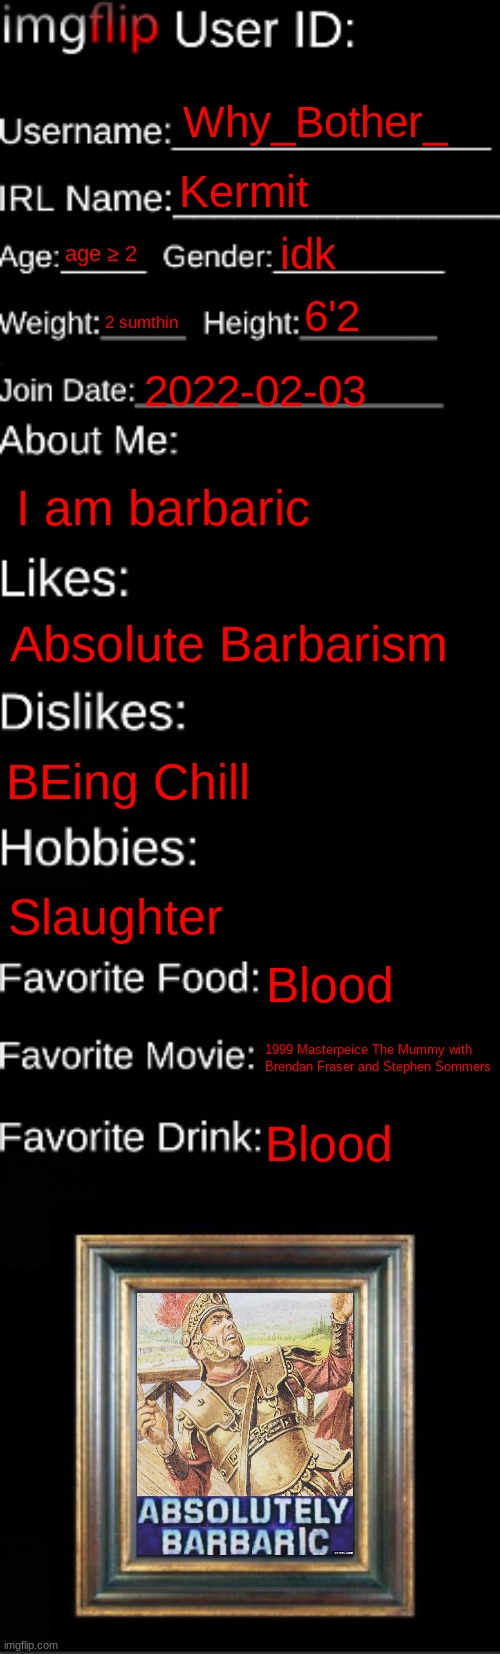 Barbaric? | Why_Bother_; Kermit; idk; age ≥ 2; 6'2; 2 sumthin; 2022-02-03; I am barbaric; Absolute Barbarism; BEing Chill; Slaughter; Blood; 1999 Masterpeice The Mummy with Brendan Fraser and Stephen Sommers; Blood | image tagged in imgflip id card | made w/ Imgflip meme maker